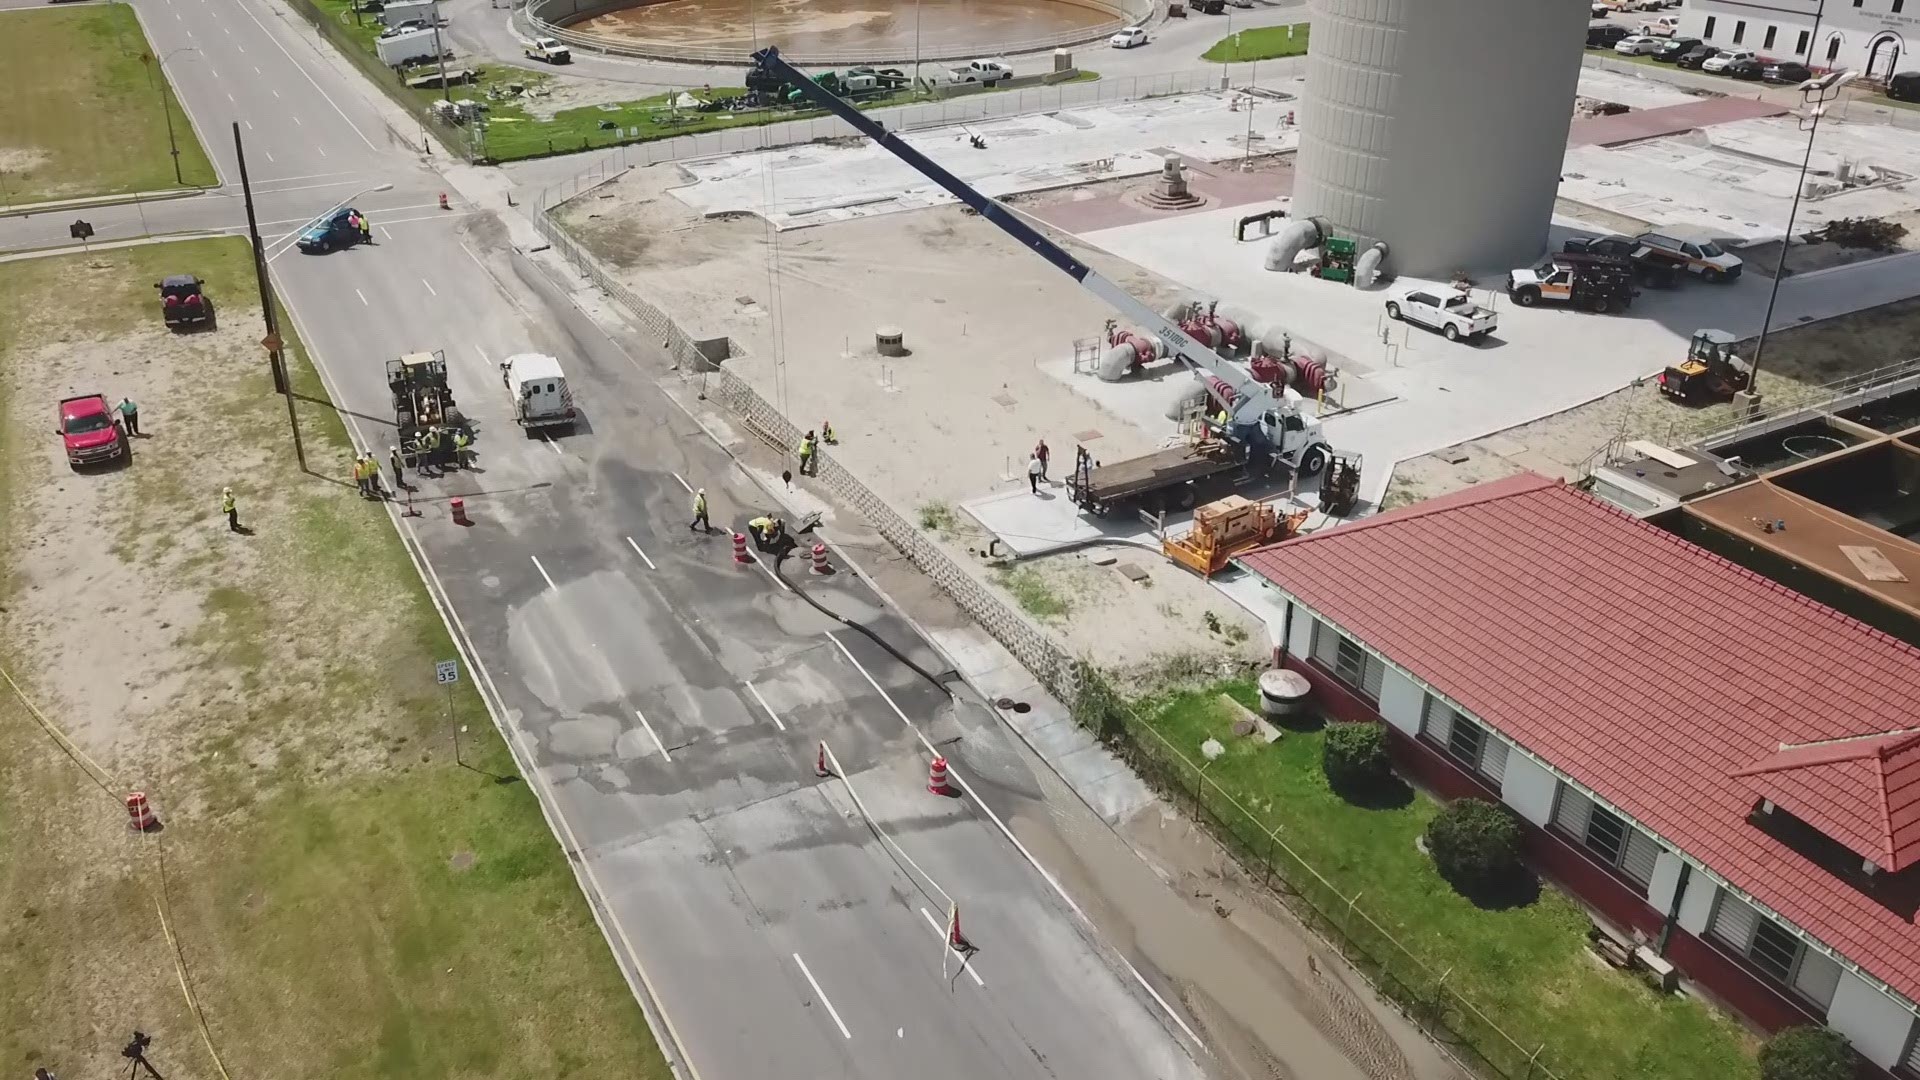 Drone video shows flooding caused by water main break near S&WB plant